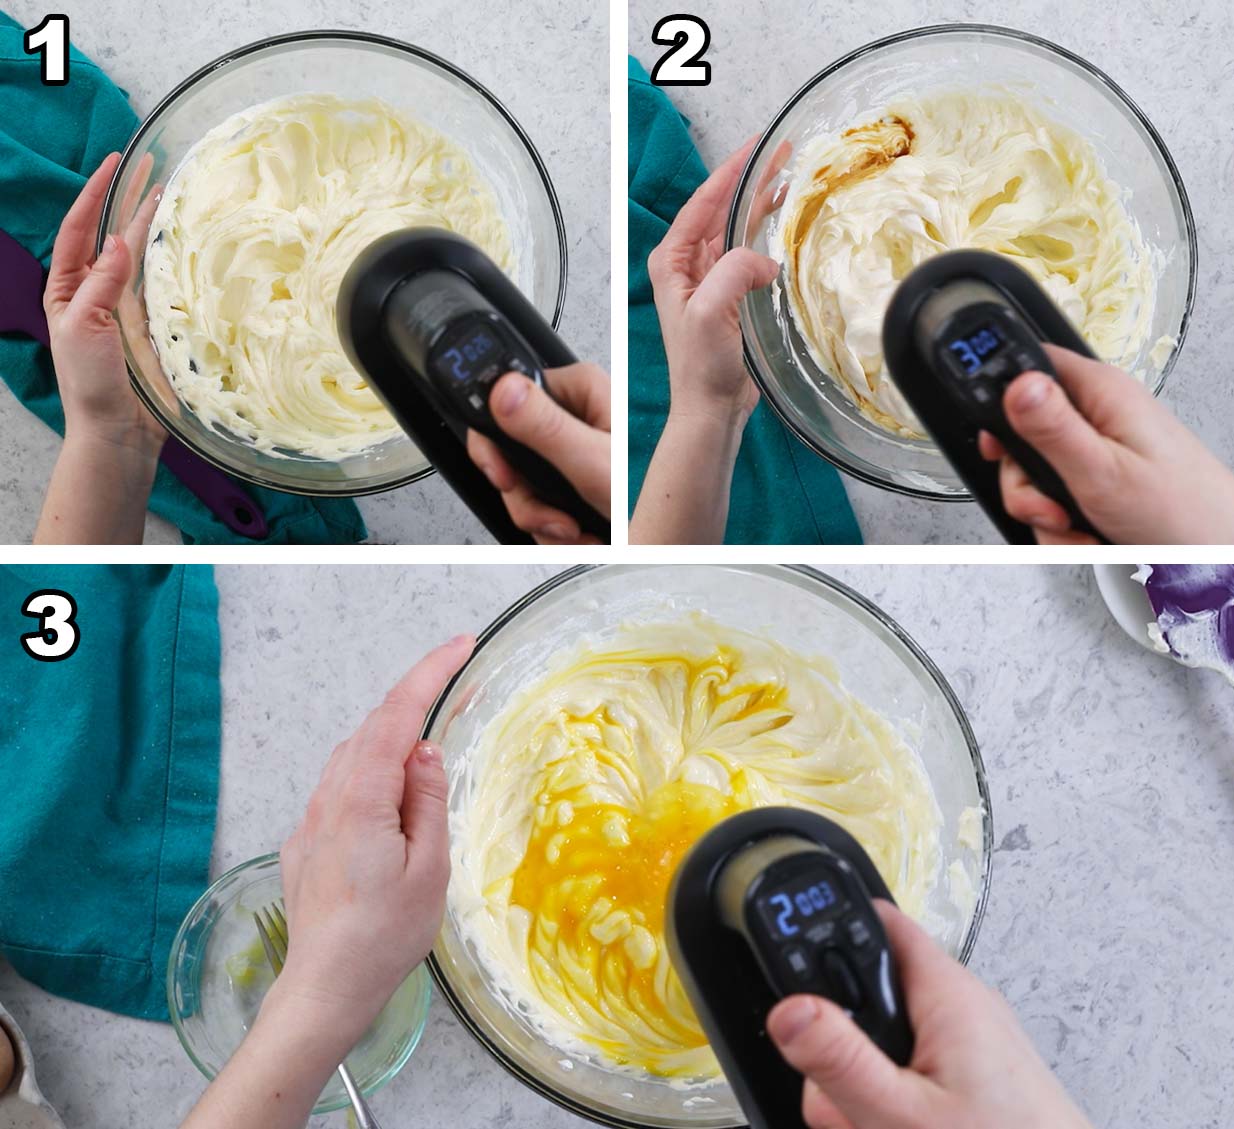 Three photos showing cheesecake batter being prepared with an electric mixer.